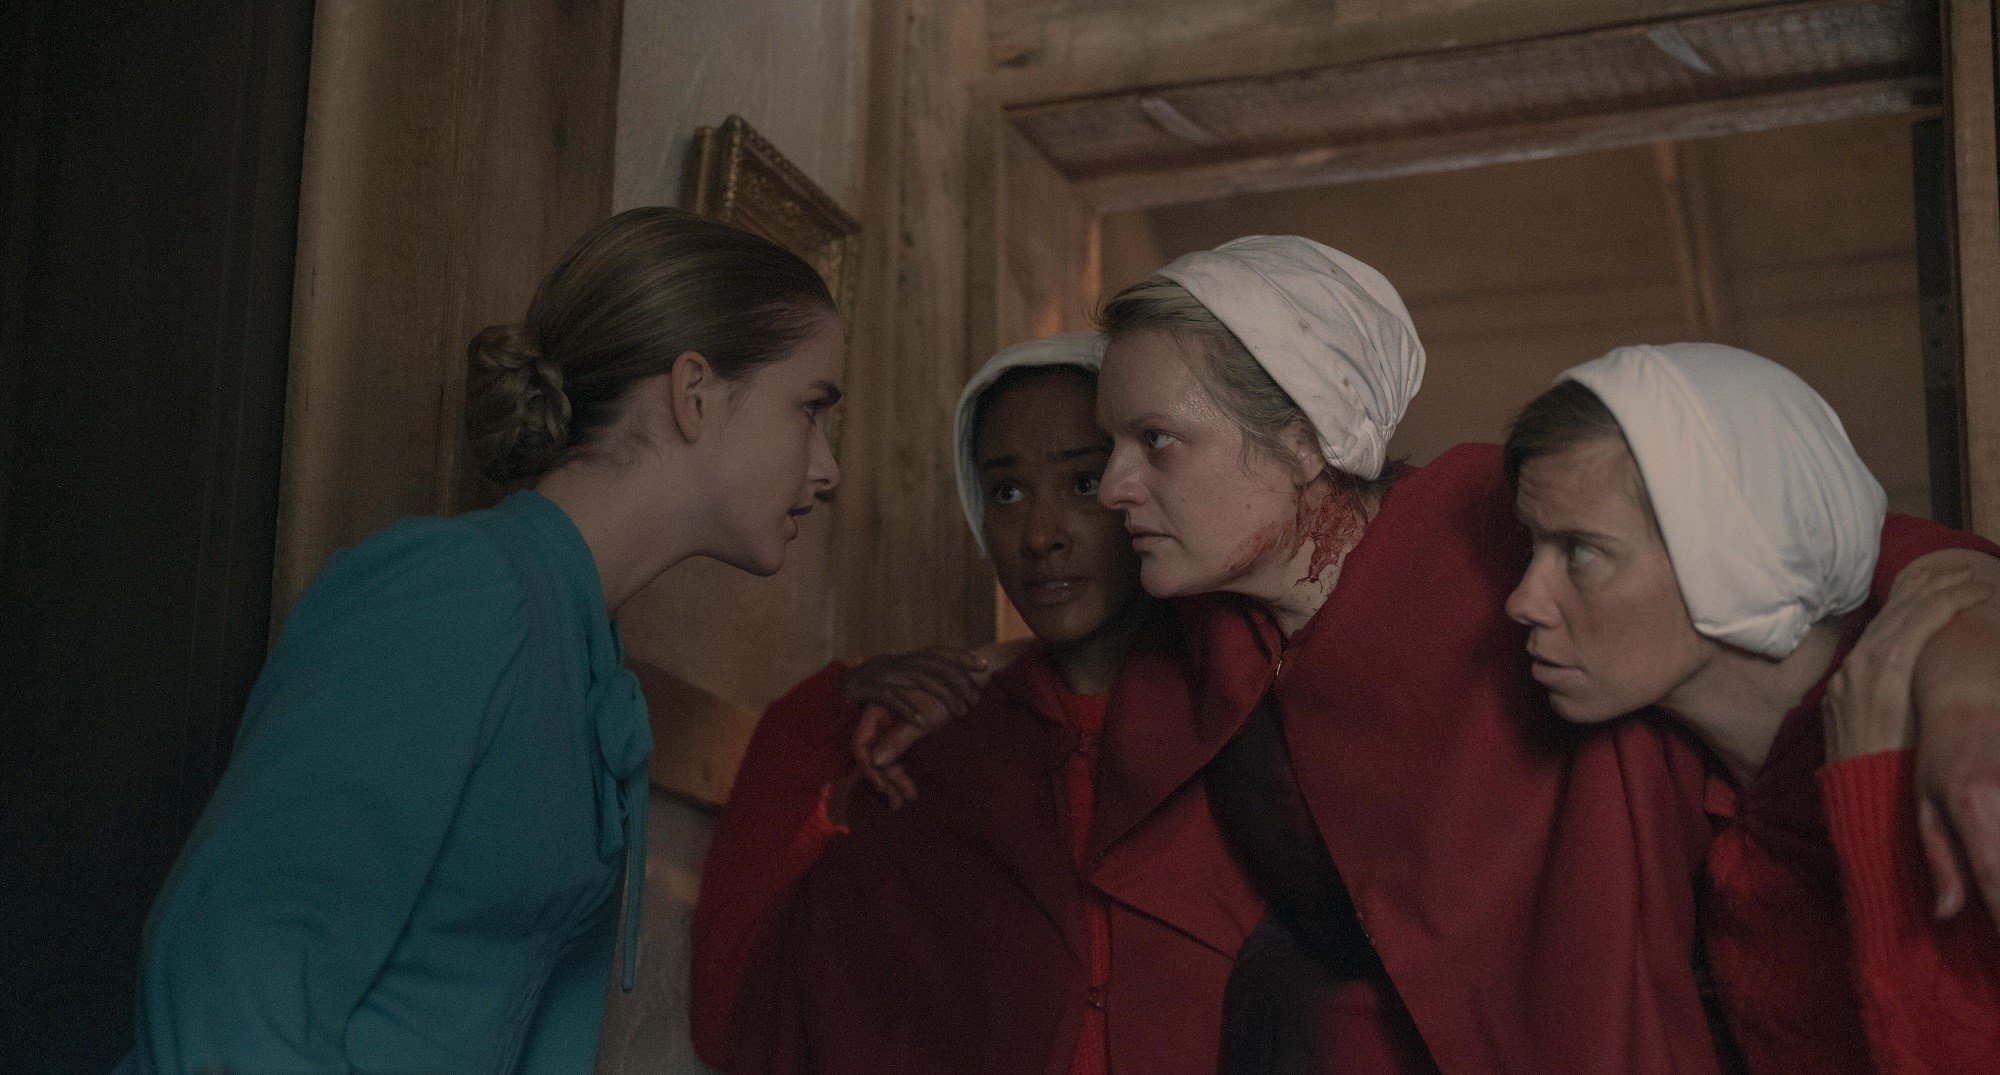 Mckenna Grace and Elisabeth Moss in season 4 episode 1 of 'The Handmaid's Tale'